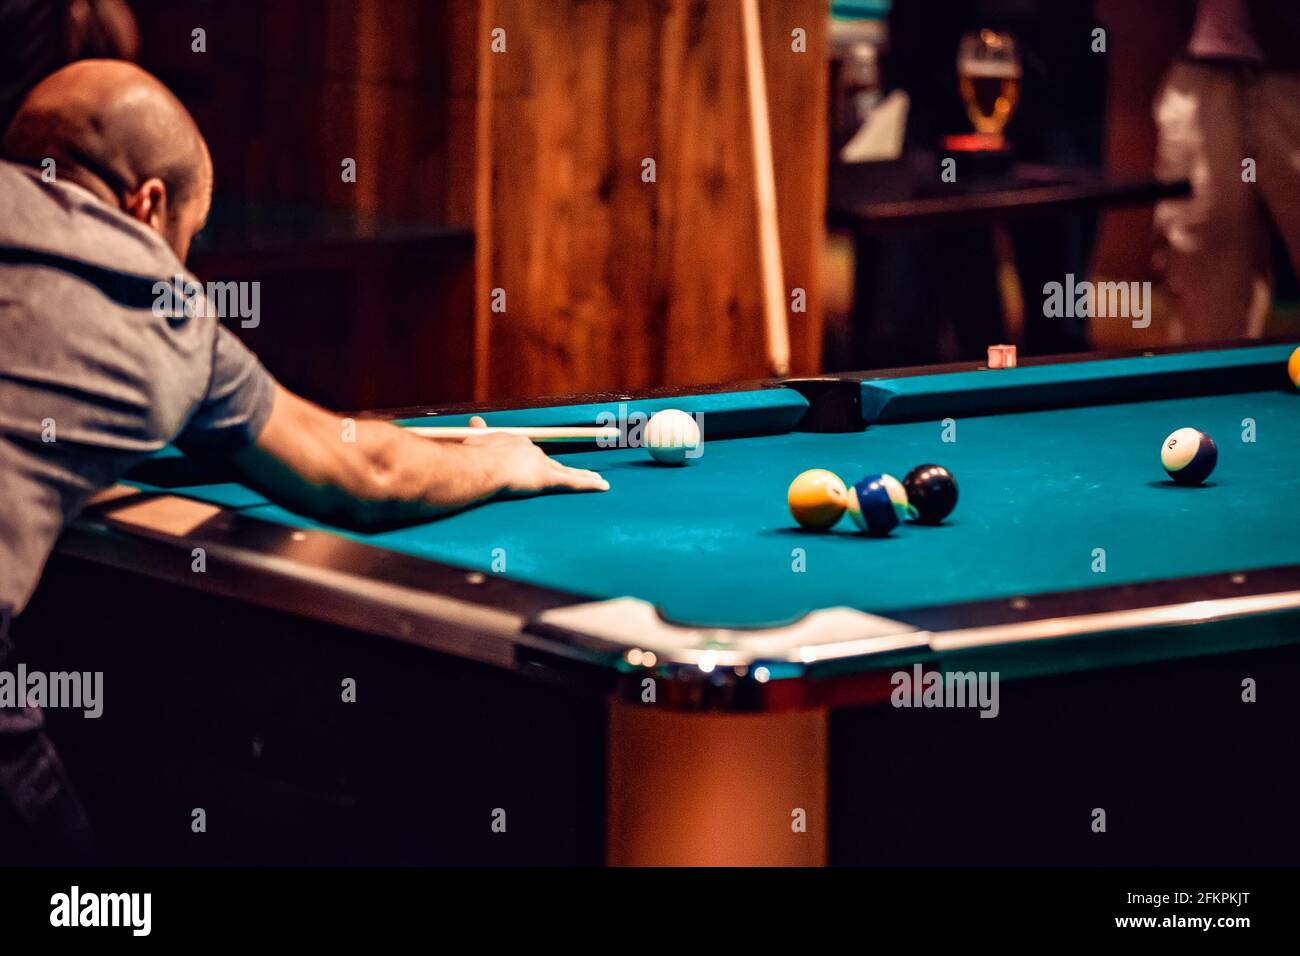 Man playing snooker, bent over to hit white ball on pool billiards table.  Stock Photo